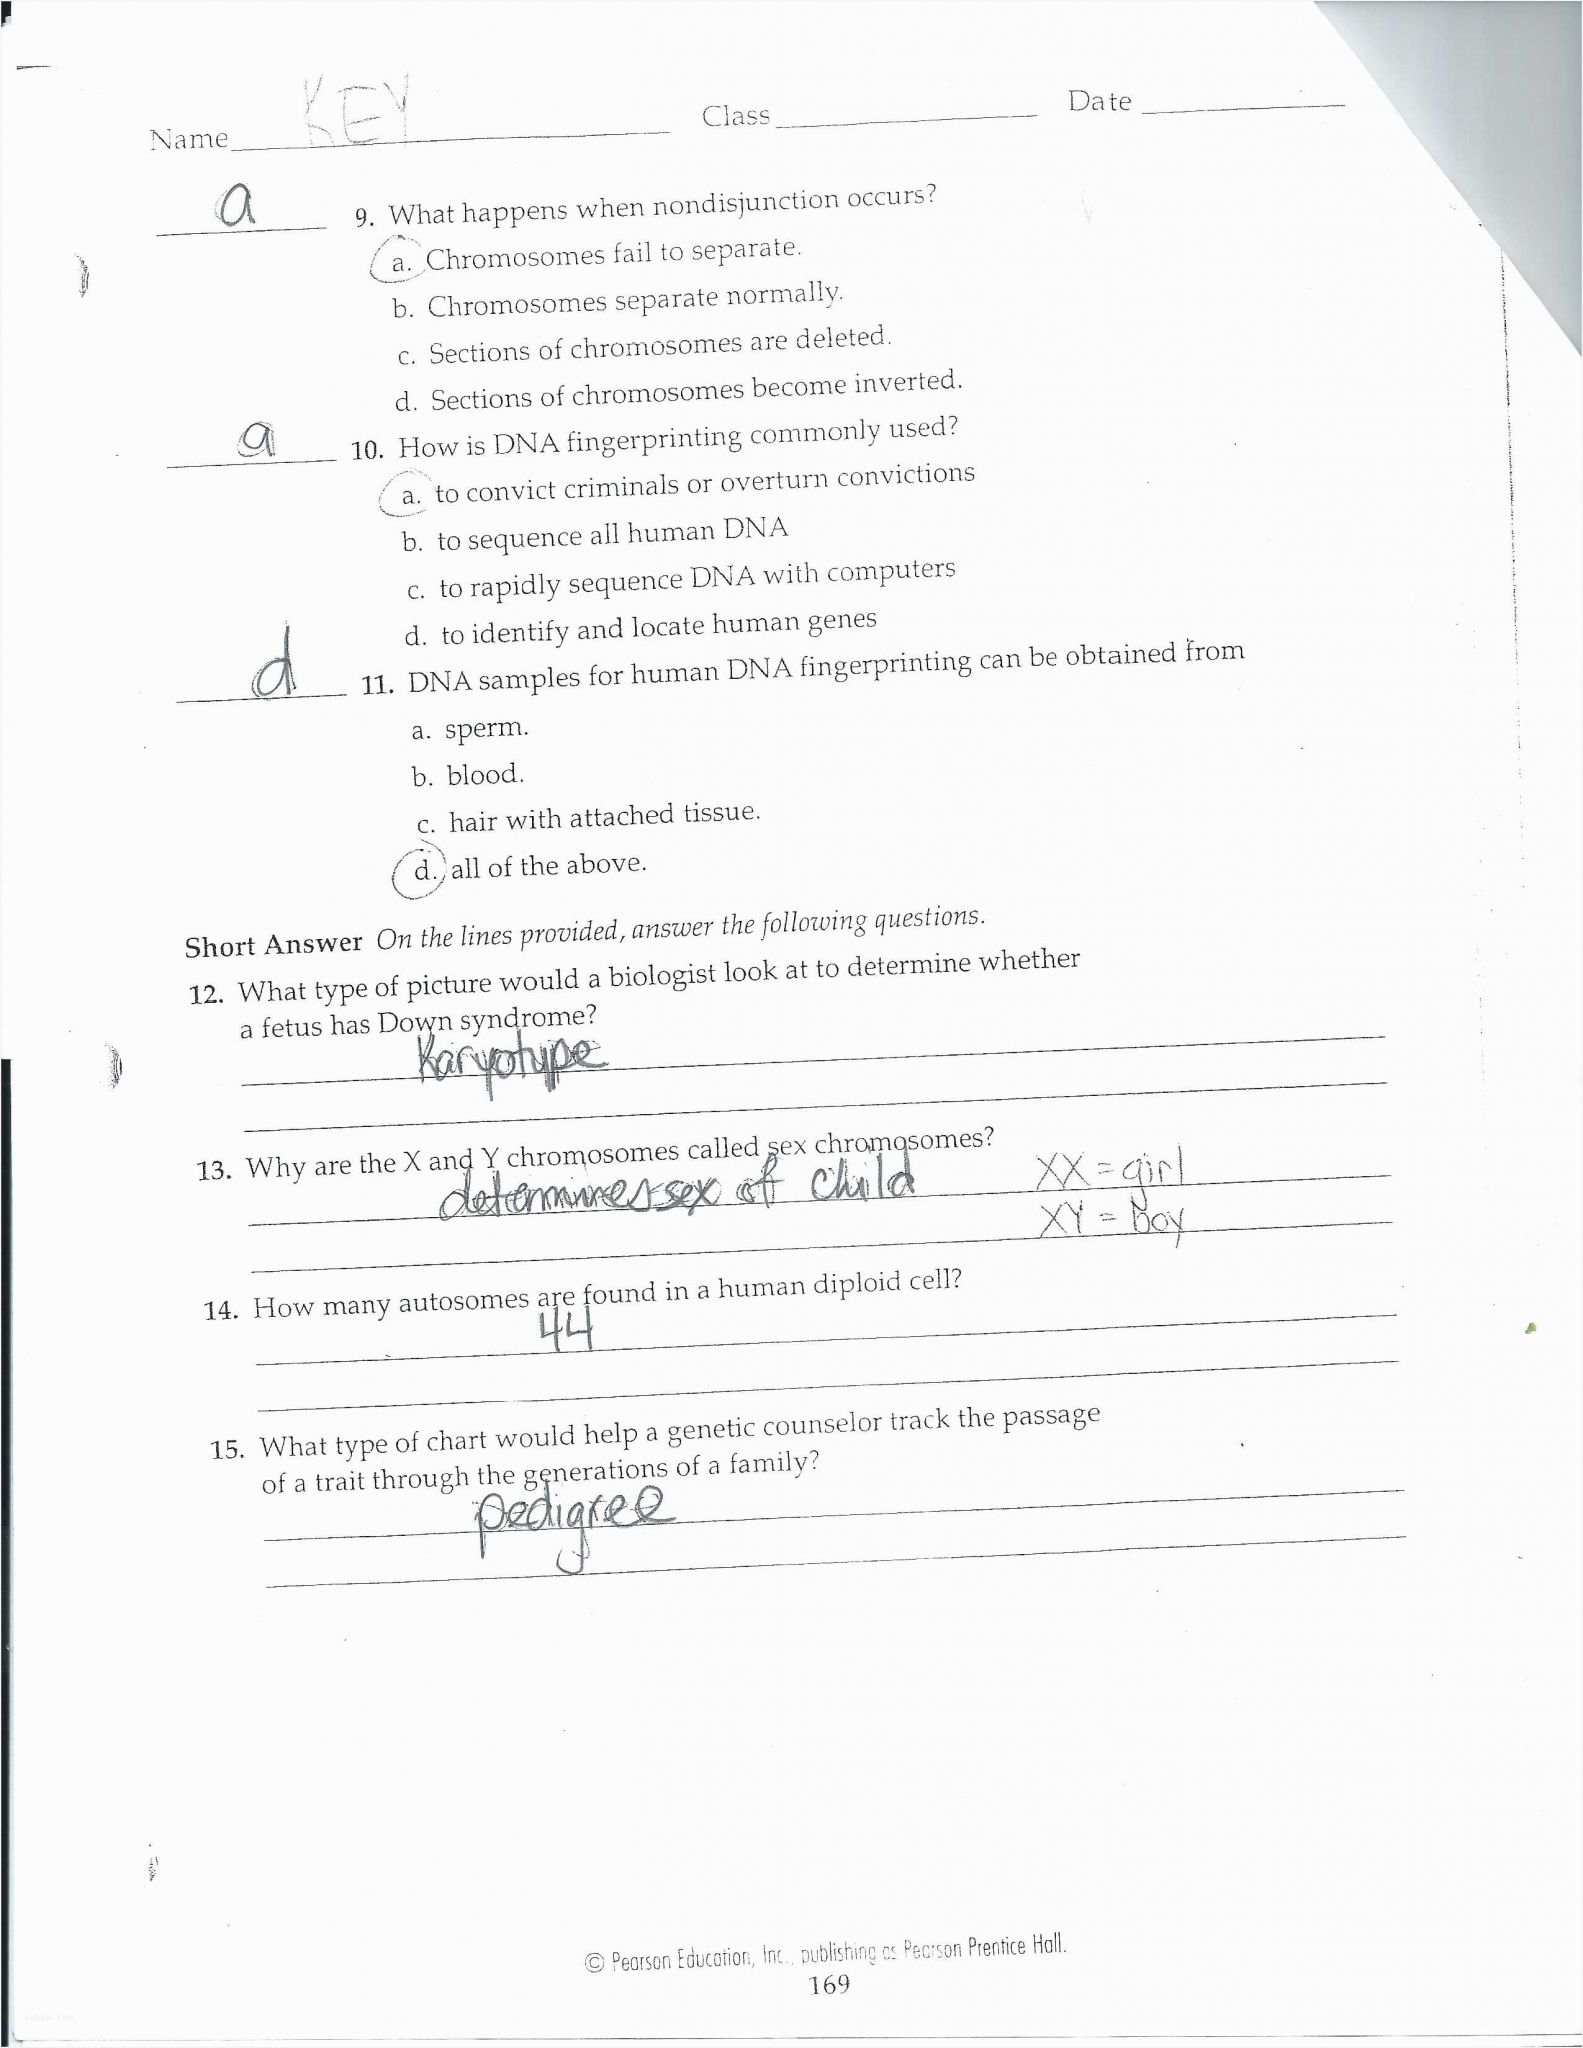 Pearson Education Inc Worksheet Answers as Well as Good Chapter 14 the Human Genome Worksheet Answer Key – Sabaax